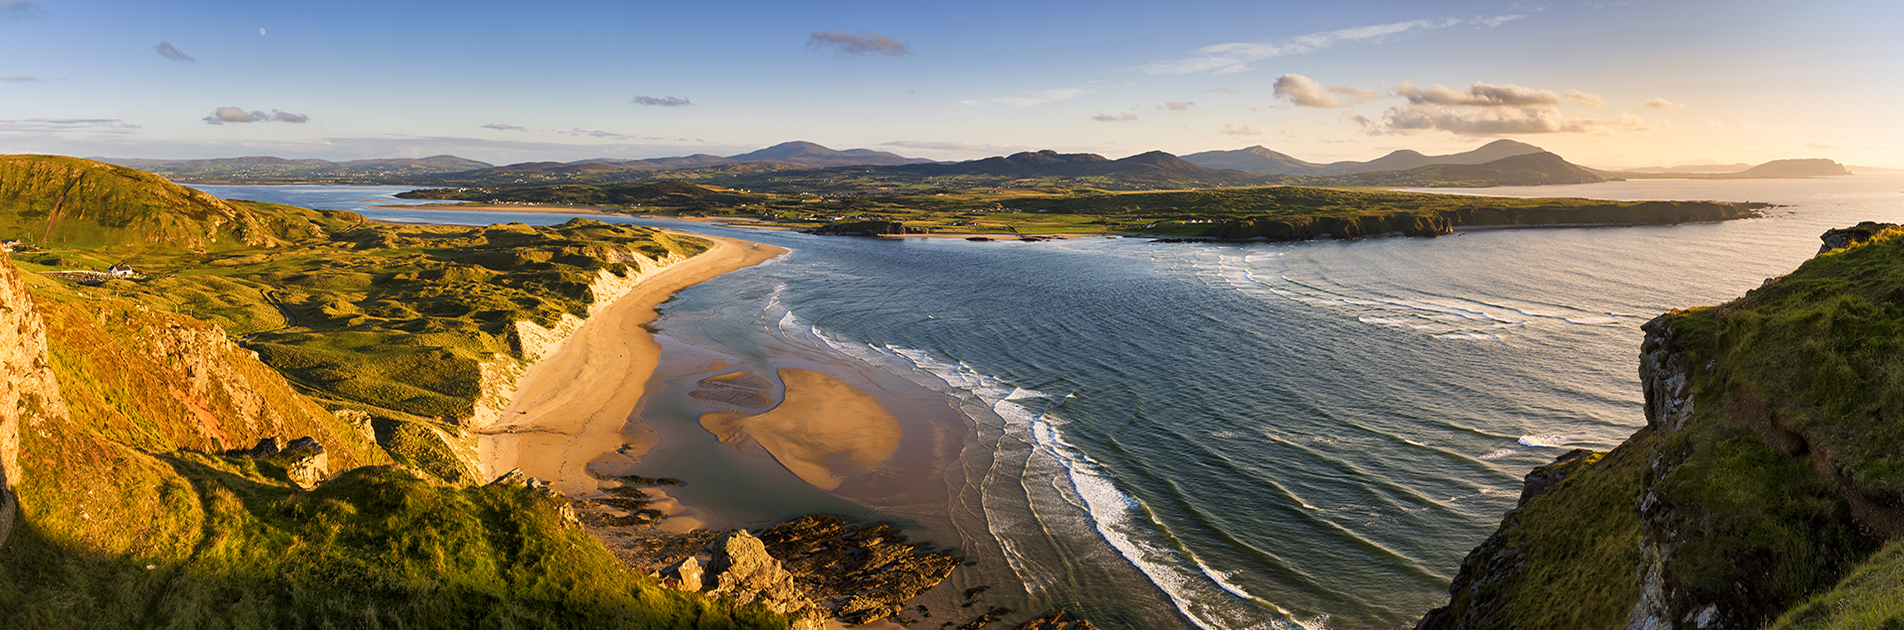 Mac Tours Ireland Five Finger Strand, Donegal